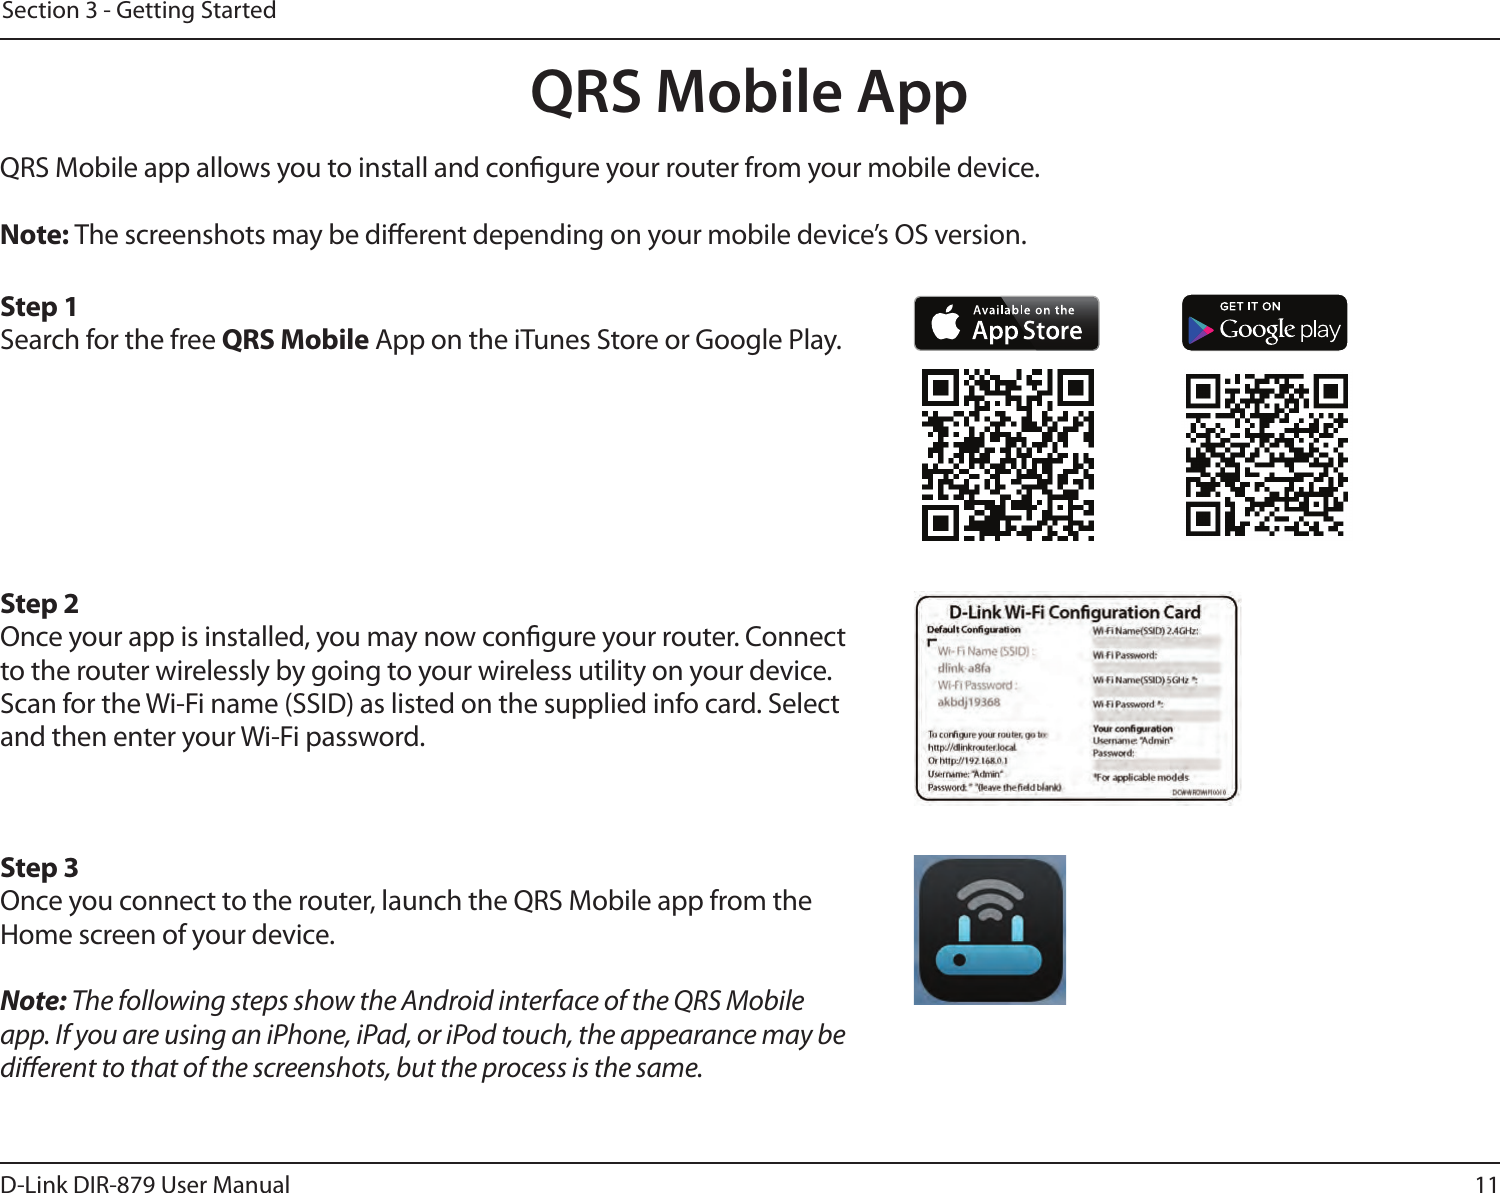 11D-Link DIR-879 User ManualSection 3 - Getting StartedQRS Mobile AppQRS Mobile app allows you to install and congure your router from your mobile device.Note: The screenshots may be dierent depending on your mobile device’s OS version. Step 1Search for the free QRS Mobile App on the iTunes Store or Google Play.Step 2Once your app is installed, you may now congure your router. Connect to the router wirelessly by going to your wireless utility on your device. Scan for the Wi-Fi name (SSID) as listed on the supplied info card. Select and then enter your Wi-Fi password.Step 3Once you connect to the router, launch the QRS Mobile app from the Home screen of your device.Note: The following steps show the Android interface of the QRS Mobile app. If you are using an iPhone, iPad, or iPod touch, the appearance may be dierent to that of the screenshots, but the process is the same.